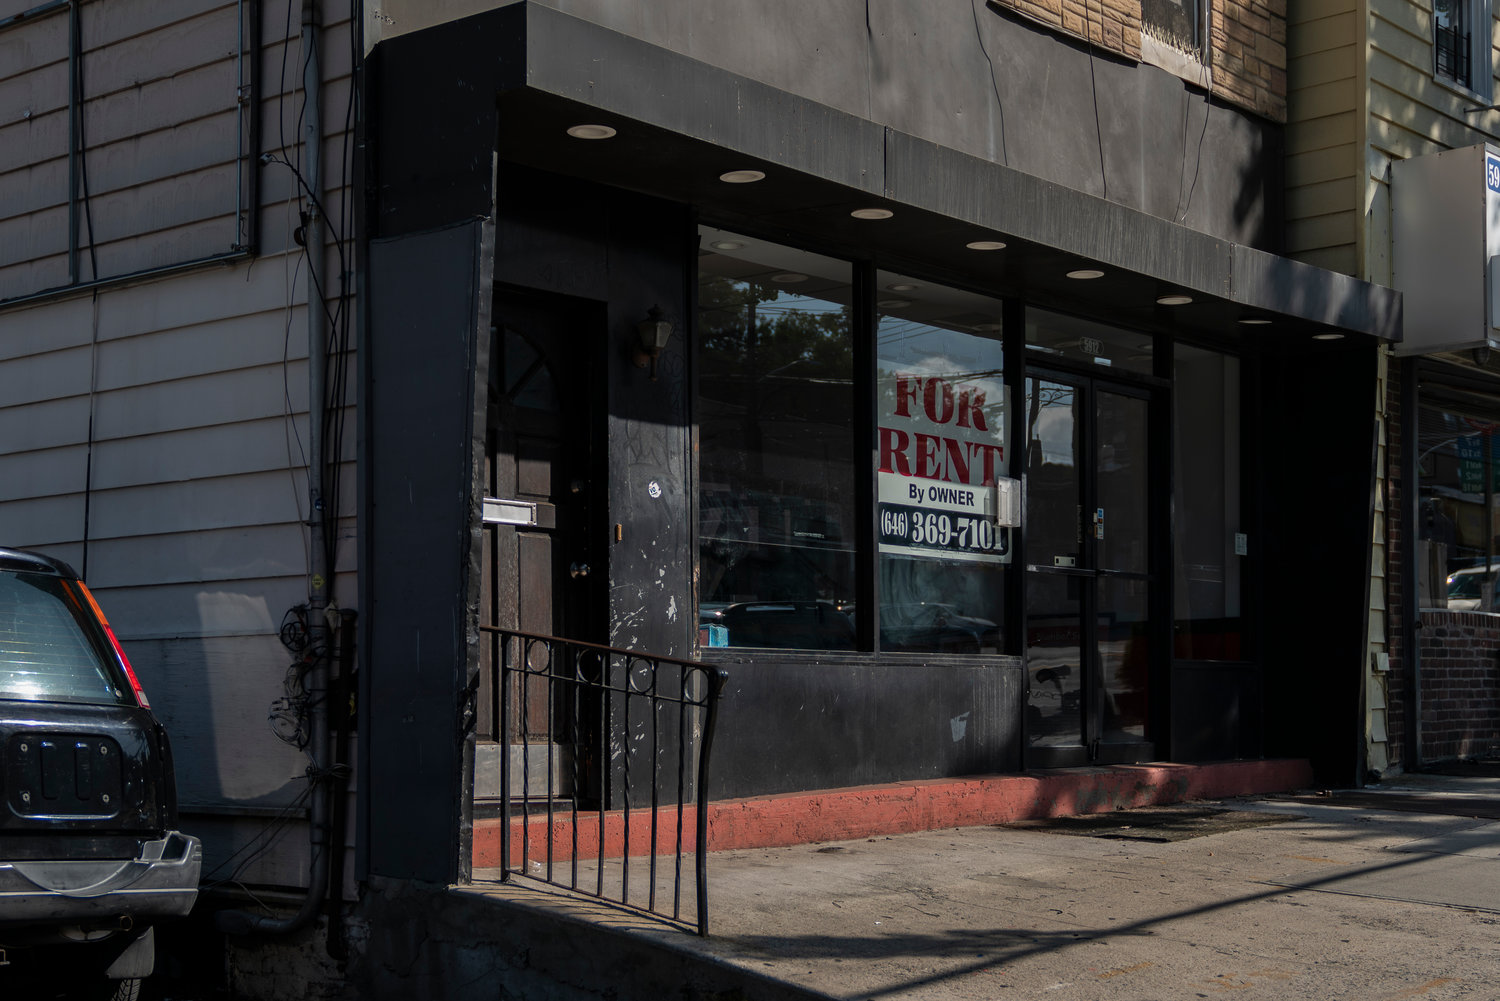 While Kumon may have just relocated, Mathnasium nearby was not as lucky. It closed its Riverdale Avenue doors in the wake of the coronavirus pandemic, leaving the space for rent